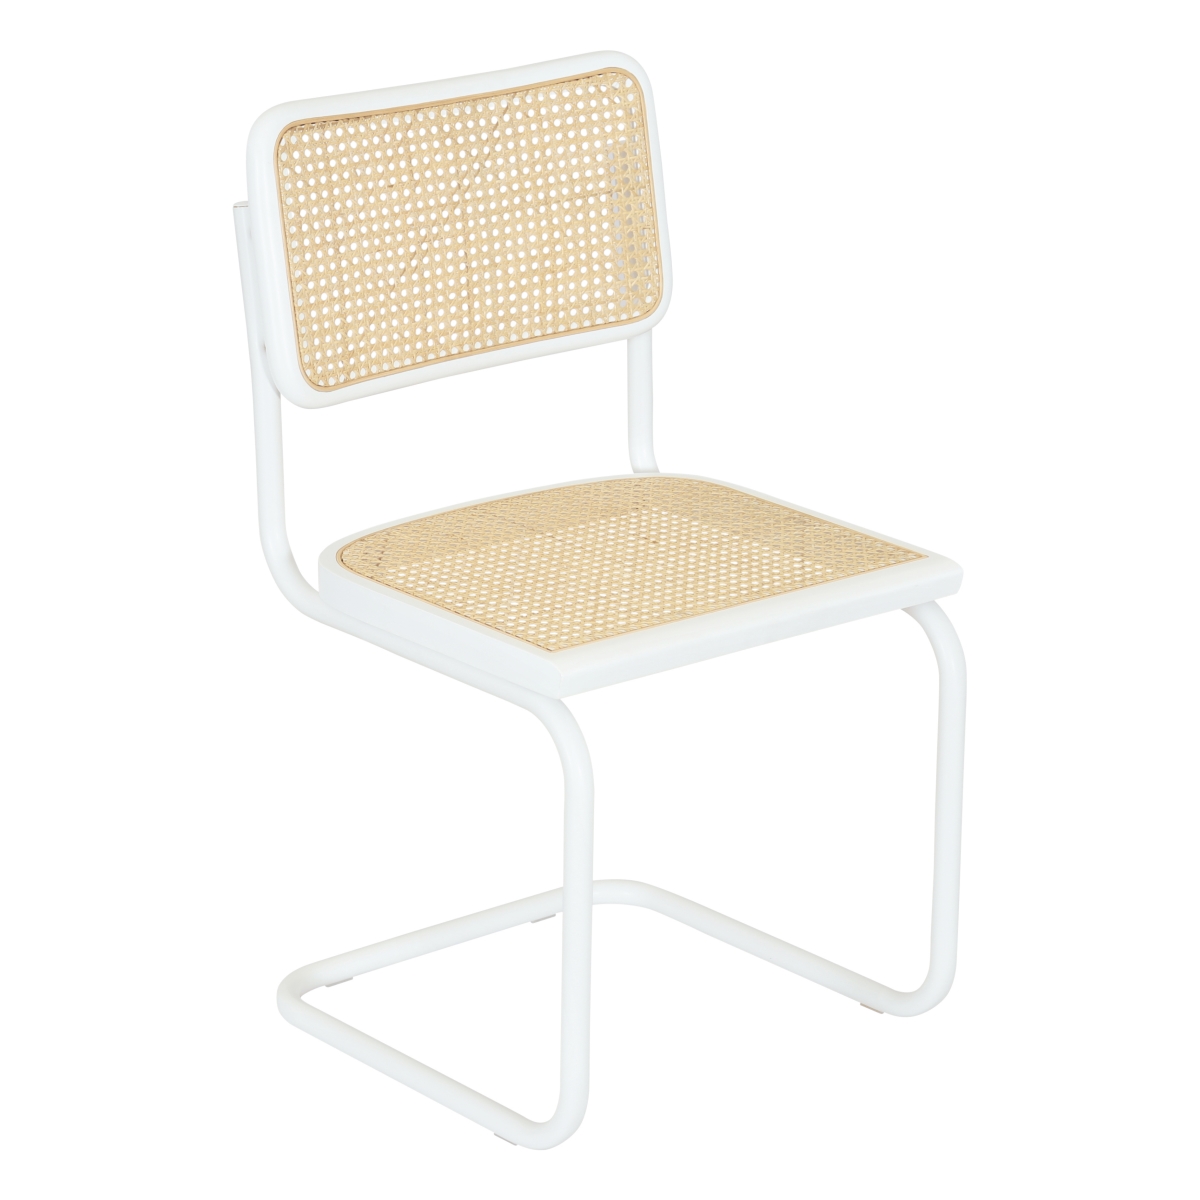 Picture of Breuer Chair Company UNB-BCC-CSCA-SC-WHTF-WHTW-NTRLC Breuer Chair Company Marcel Breuer B32 Cesca Cane Cantilever Side Chair w/ White Steel Frame White Wood & Natural Cane (Made in Italy) by Furnish Theory